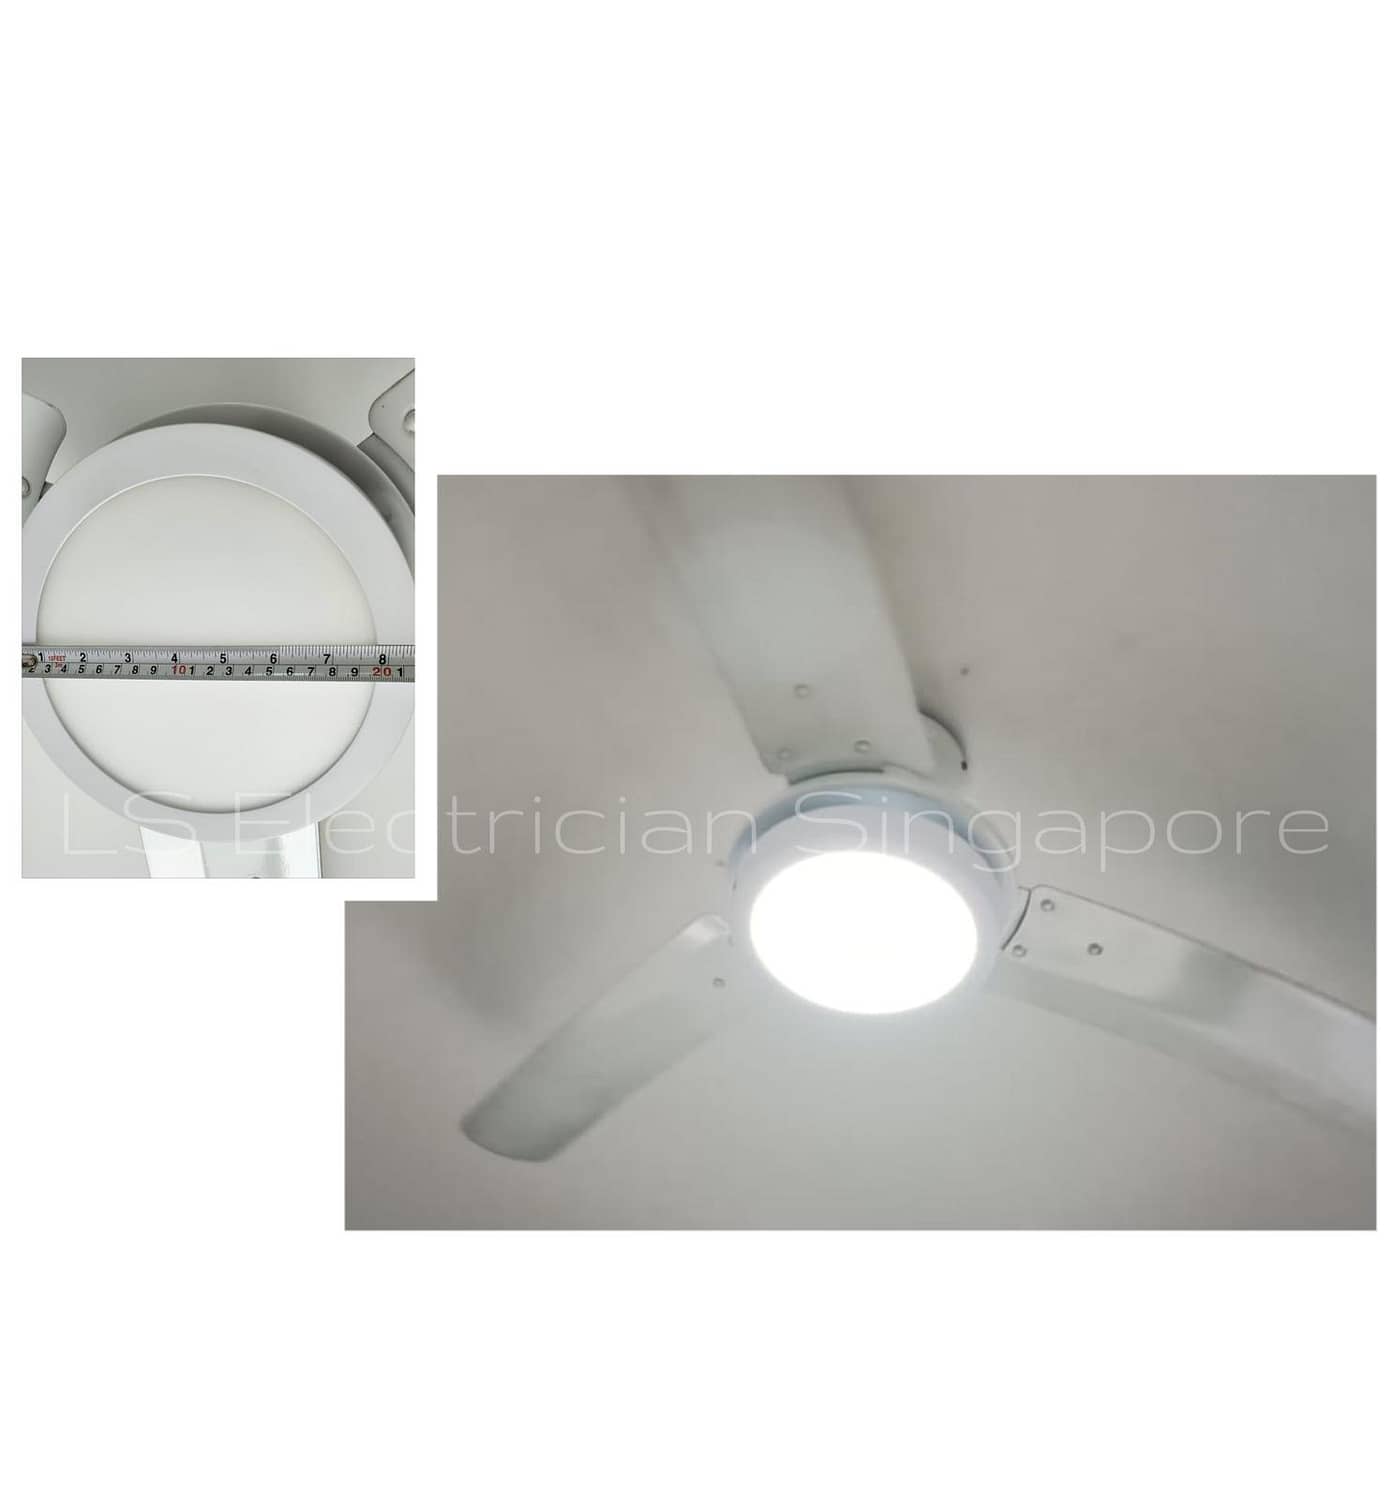 Supply And Replace Ceiling Fan Light